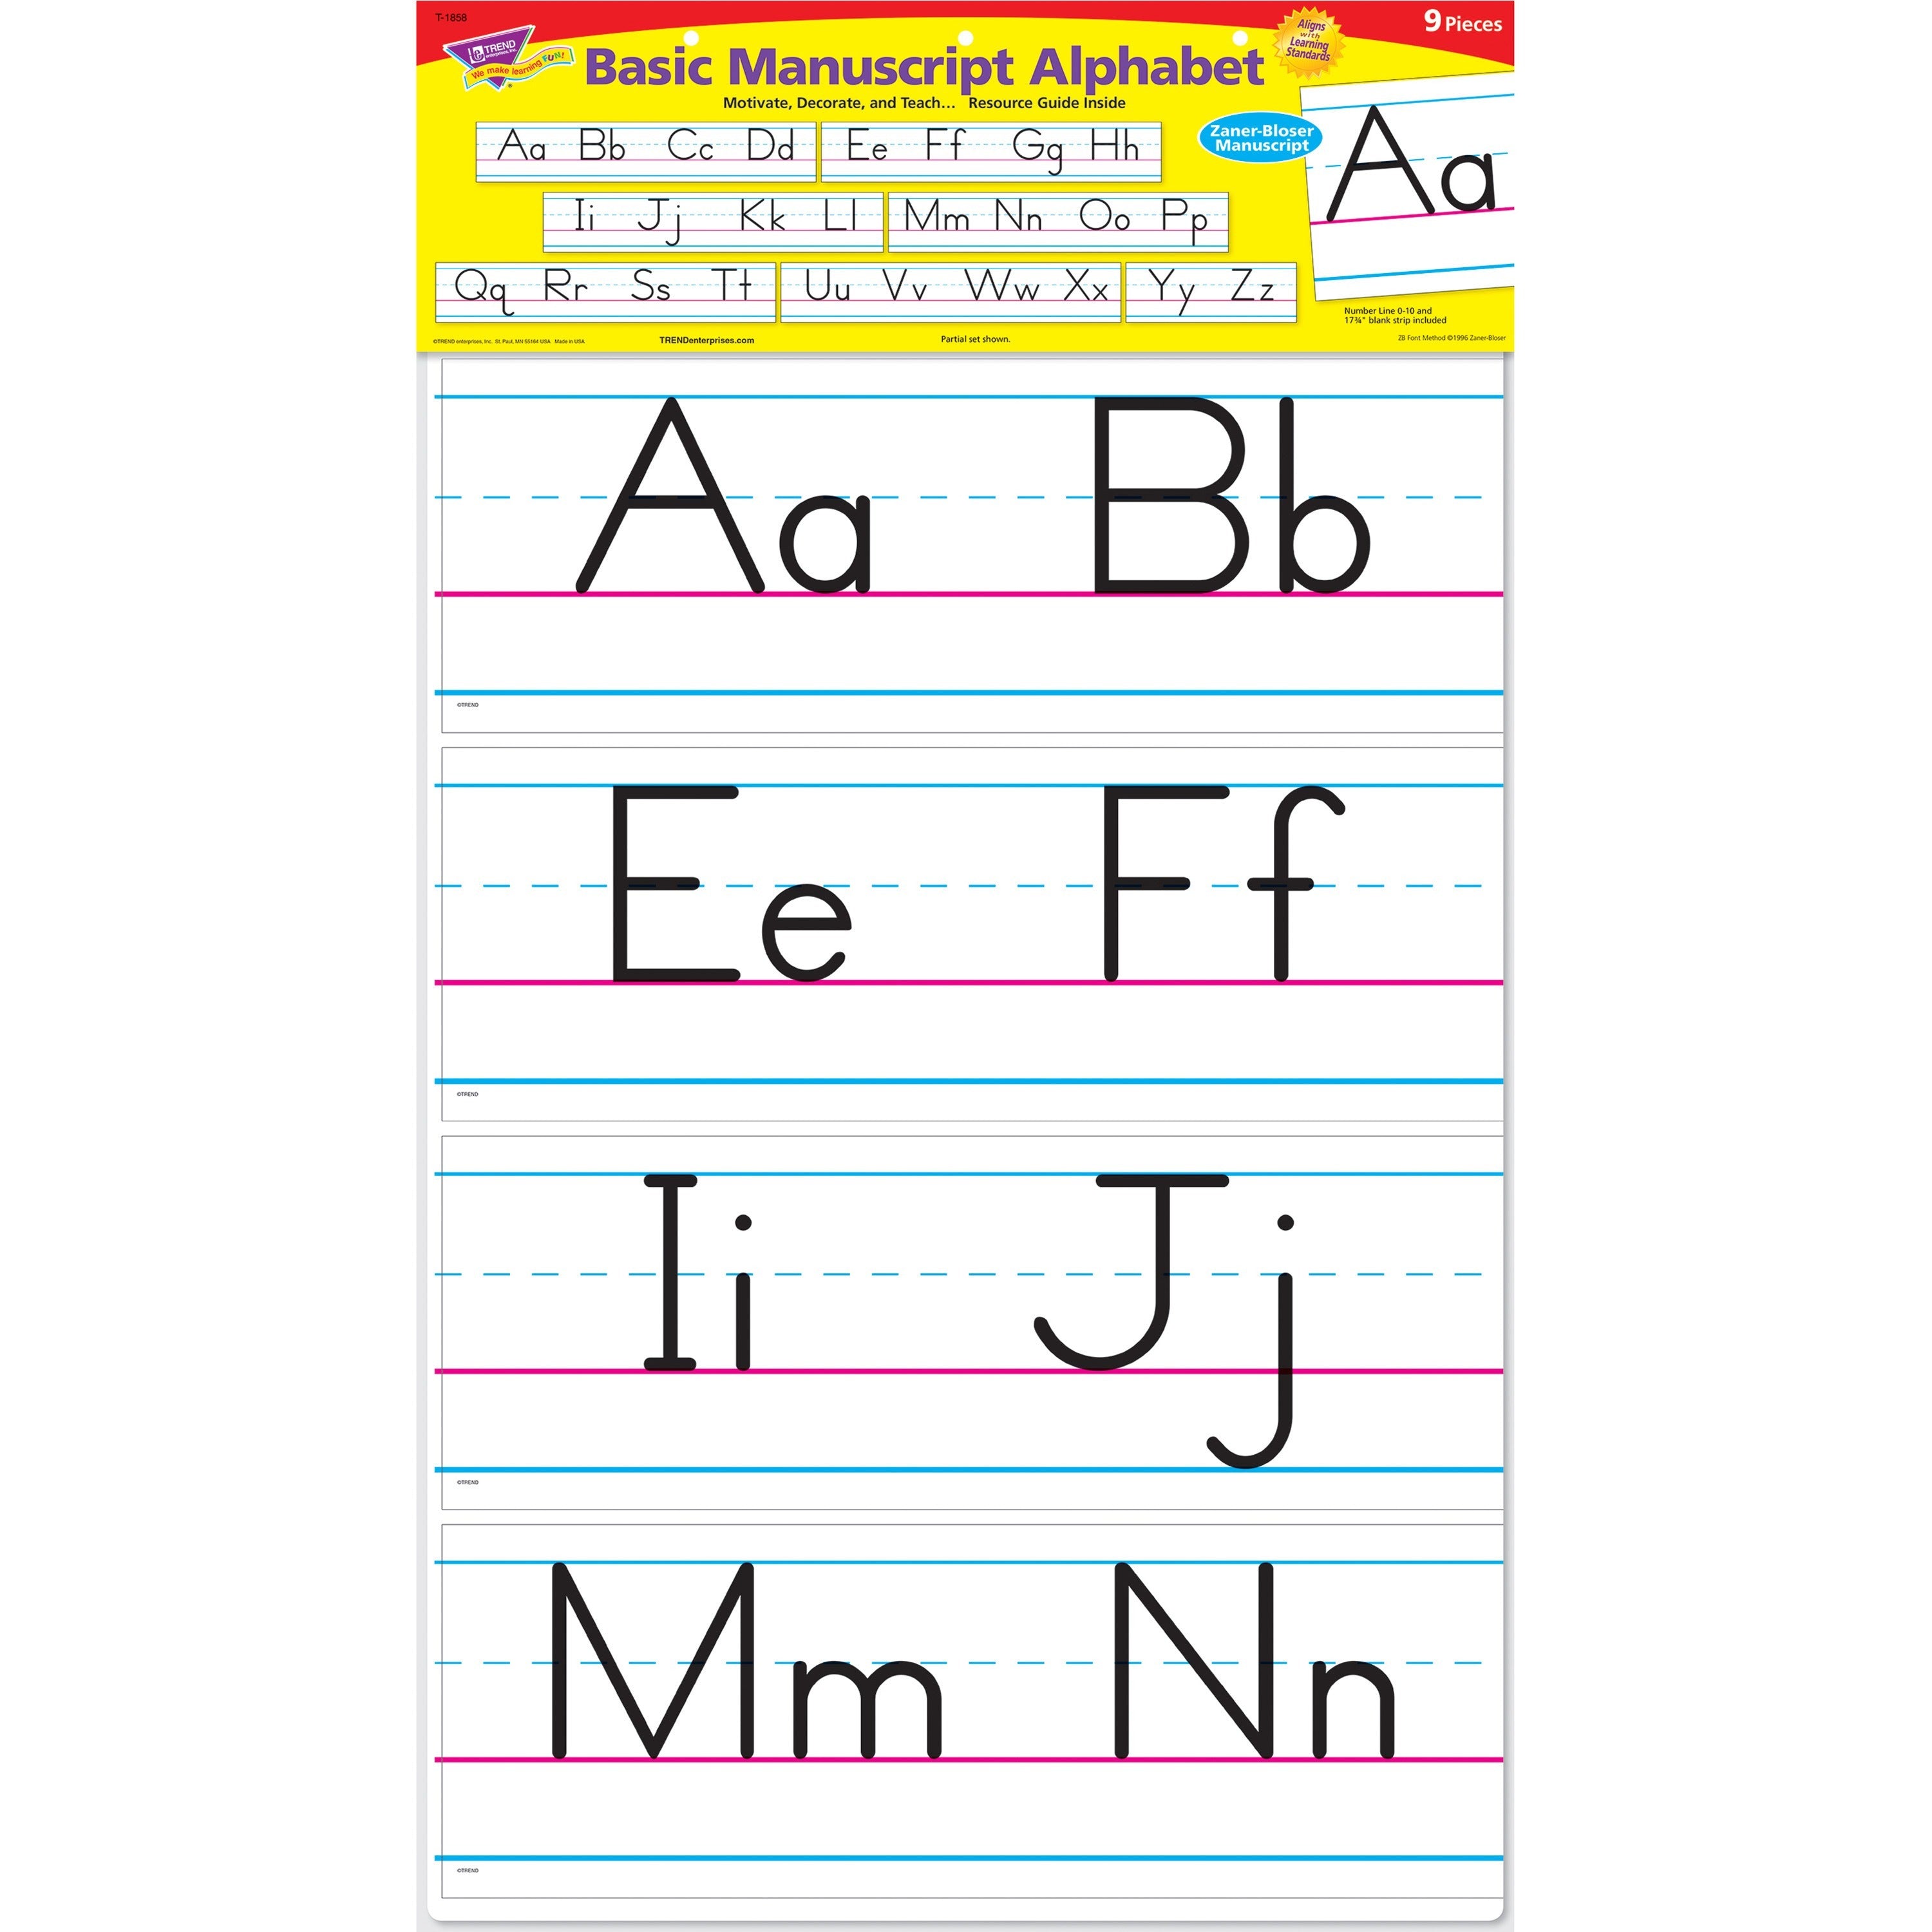 trend-basic-alphabet-bulletin-board-set-learning-theme-subject-7-x-letter-1-x-numbers-shape-reusable-durable-multicolor-1-pack_tep1858 - 1